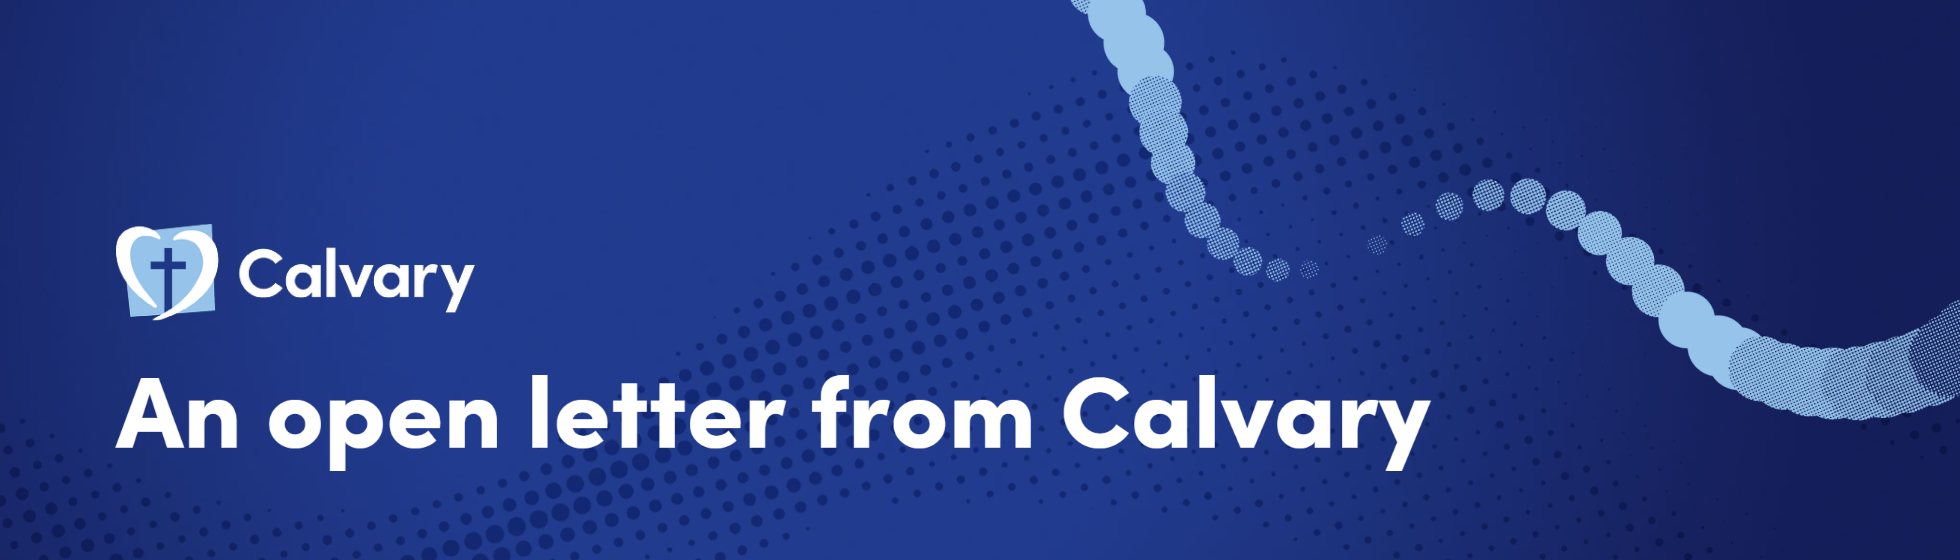 An open letter from Calvary following the acquisition of Calvary Public Hospital Bruce